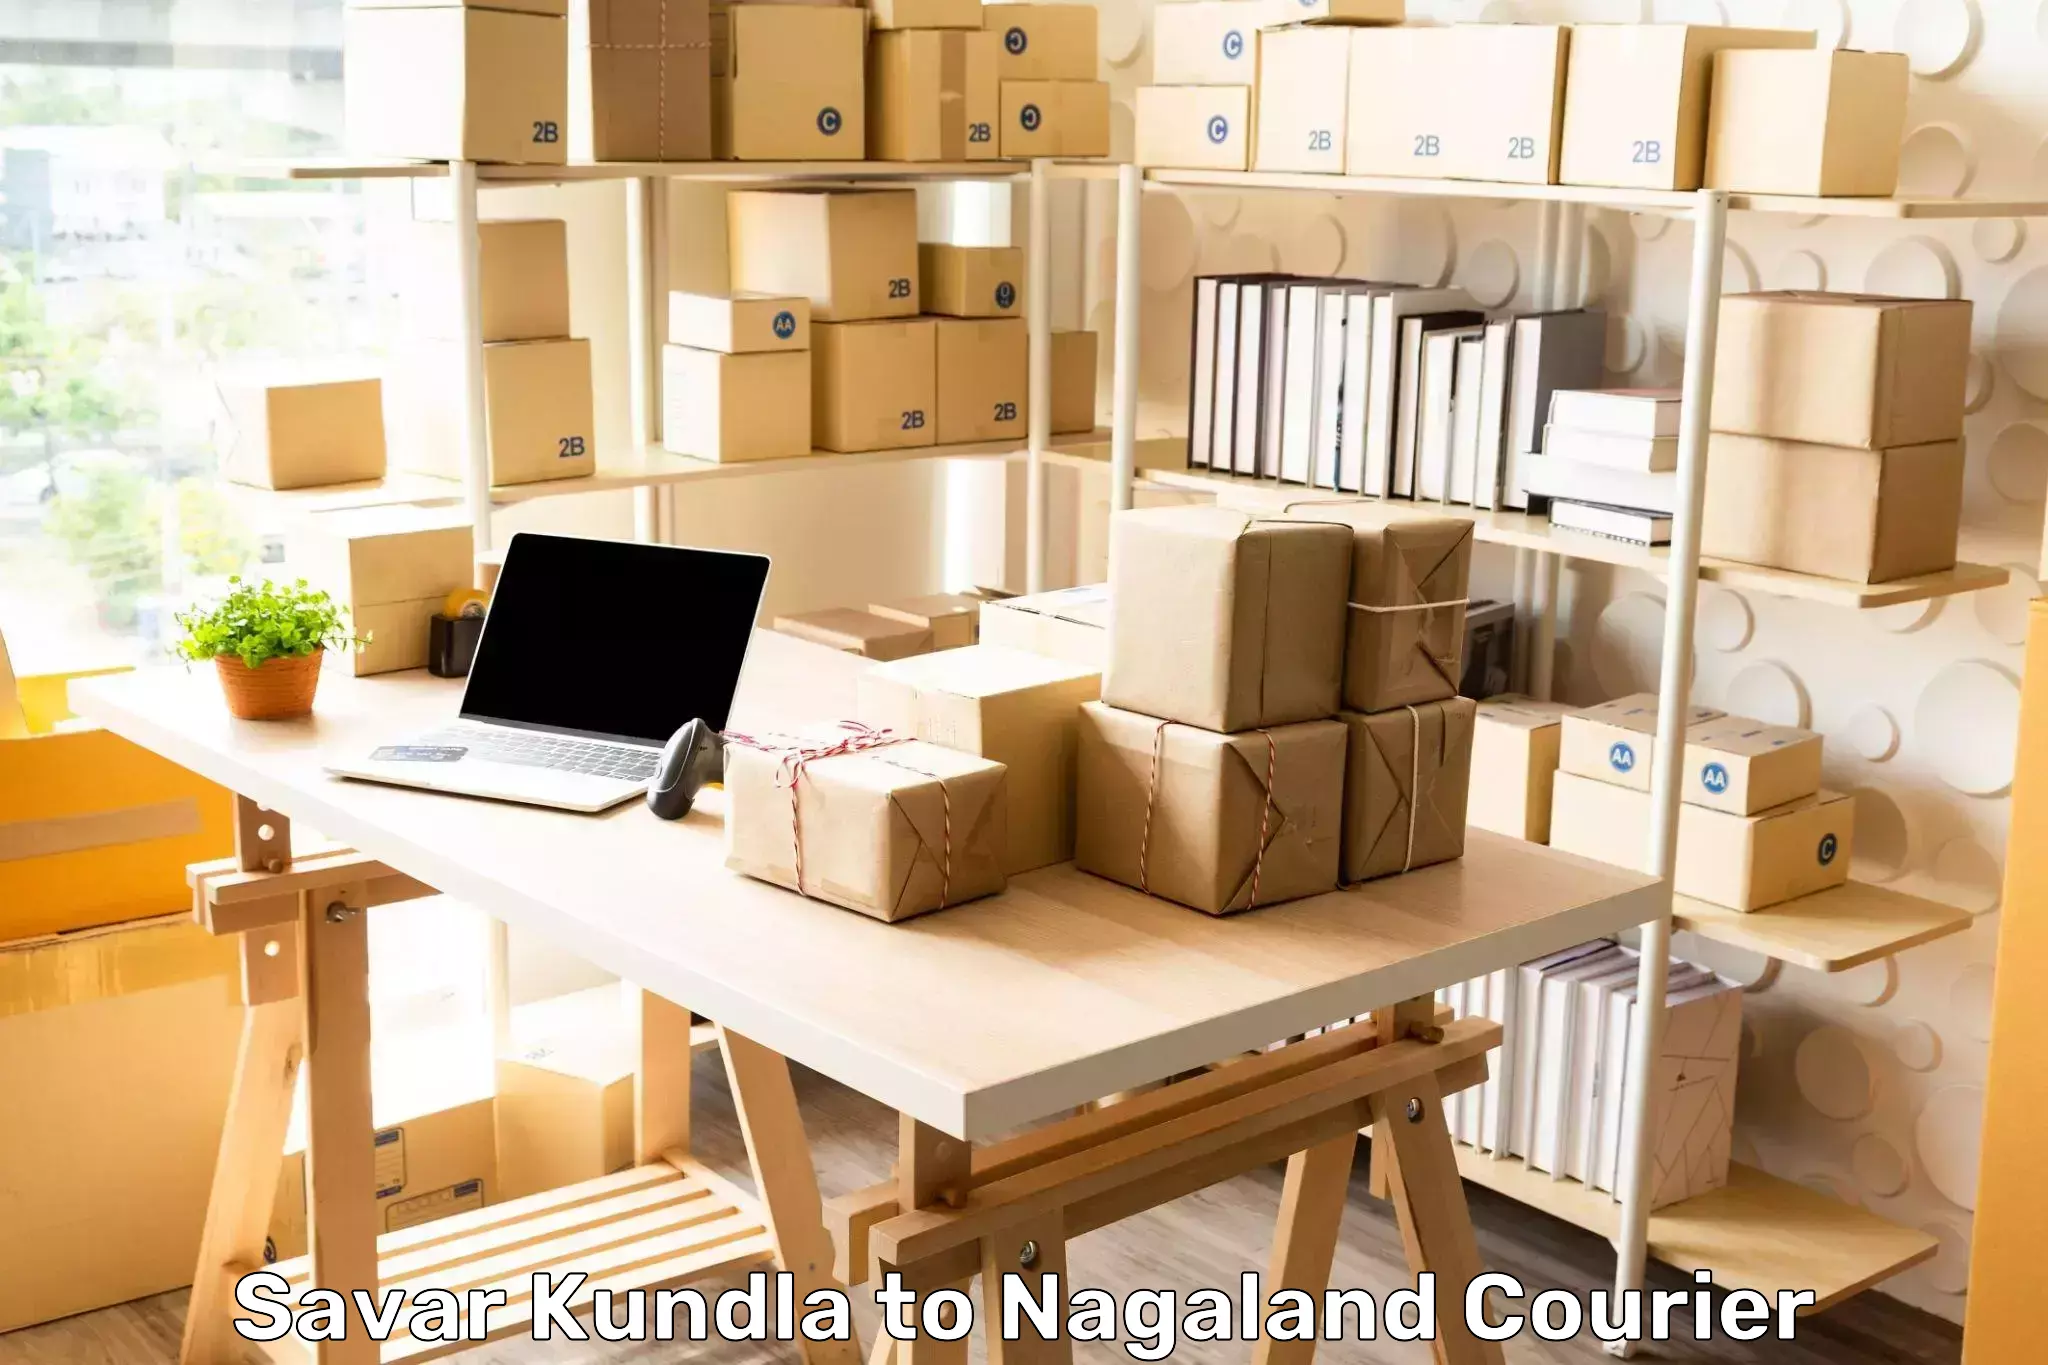 Customer-oriented courier services in Savar Kundla to Dimapur